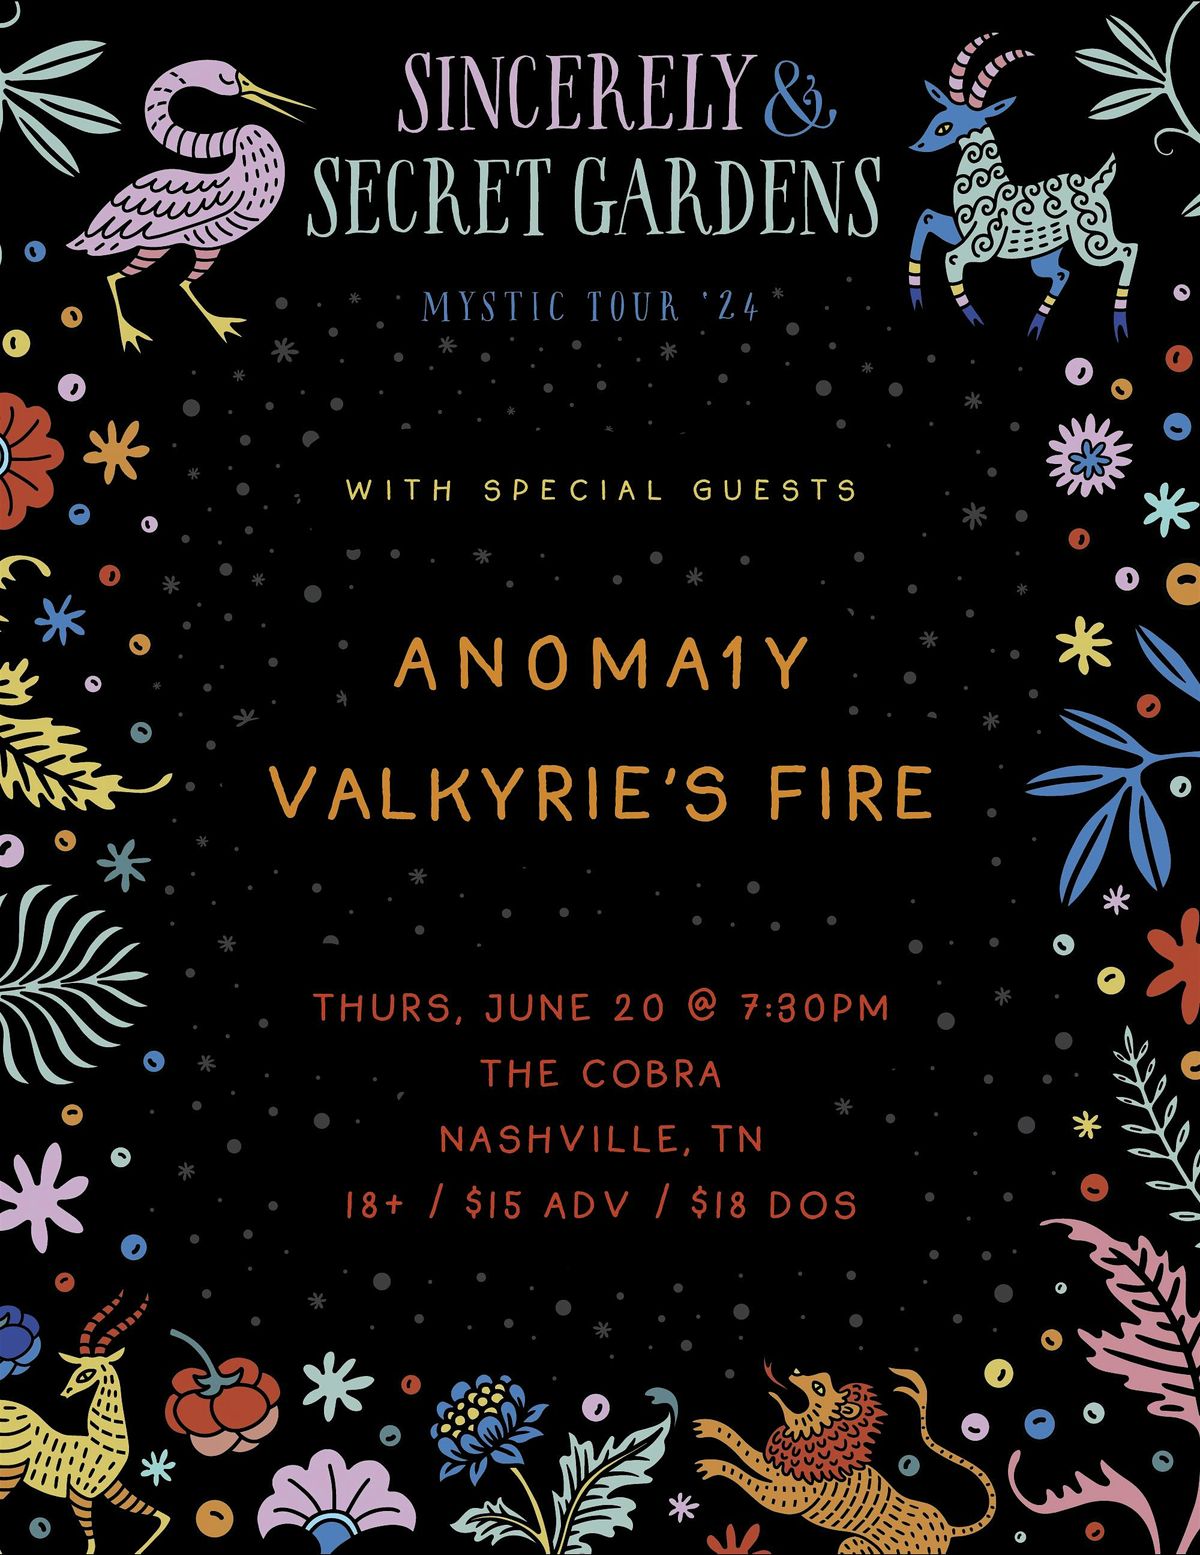 Sincerely | Secret Gardens | ANOMA1Y | Valkyrie's Fire